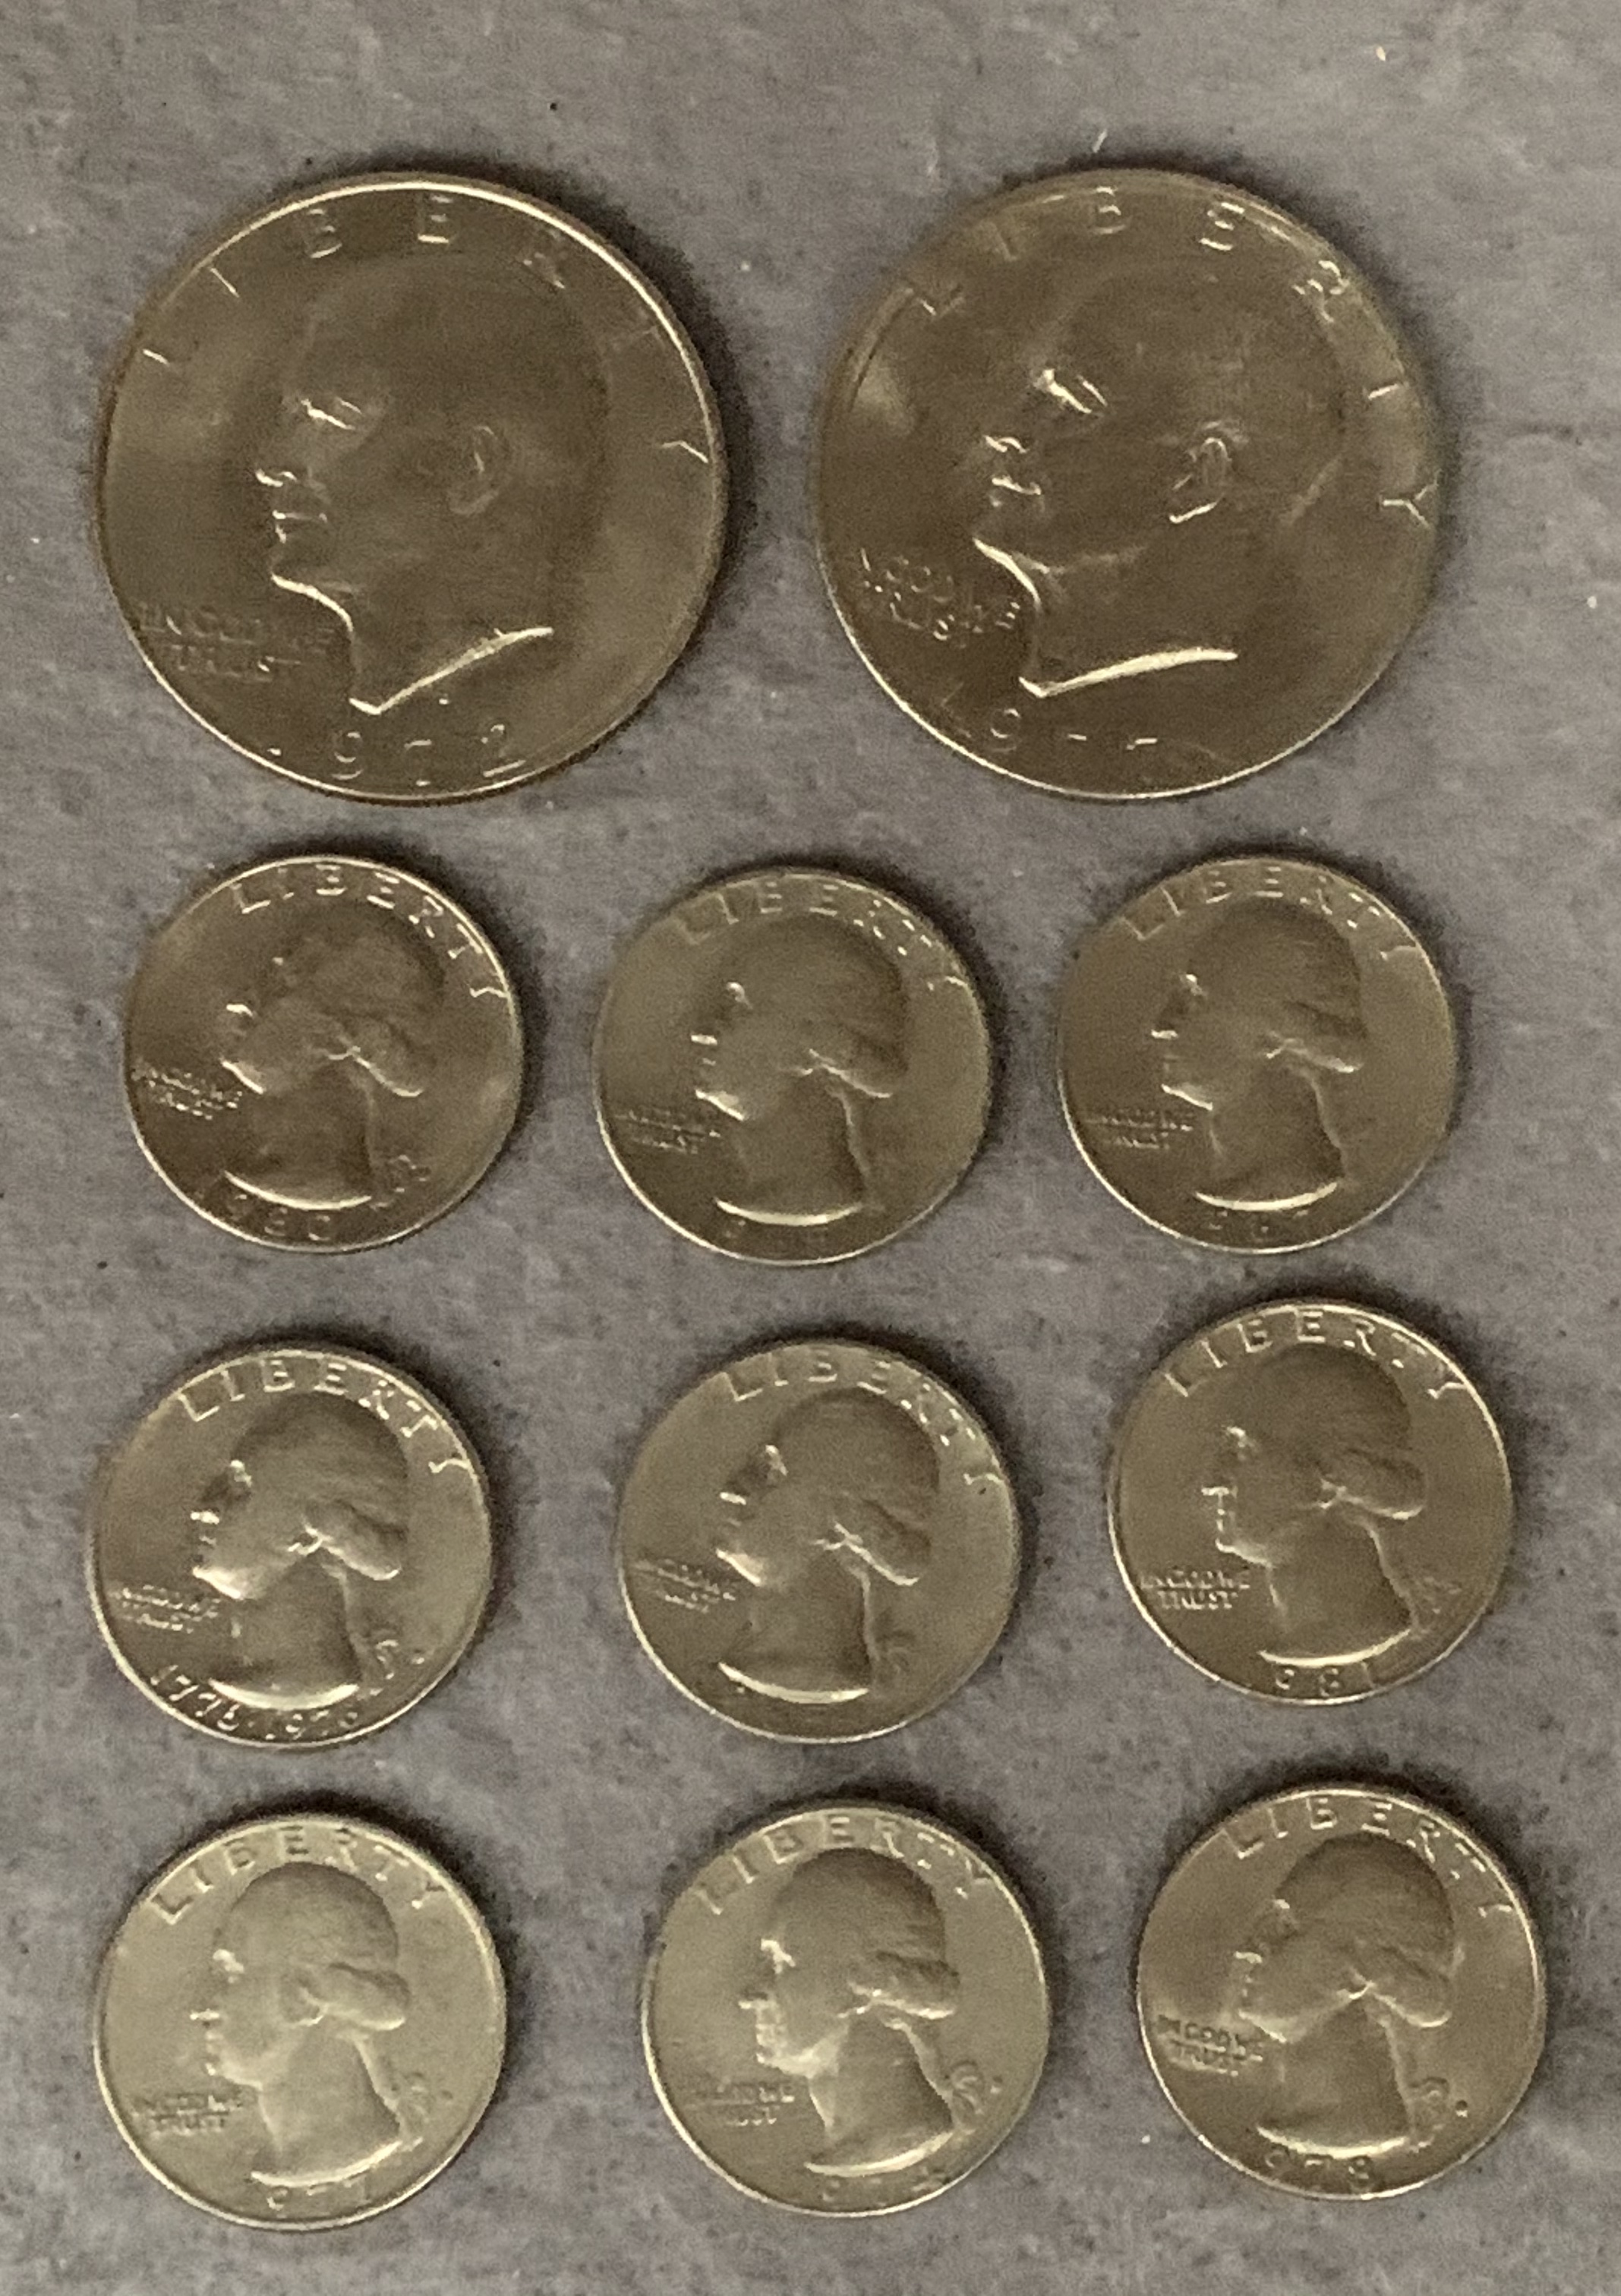 Contents to bag - two American dollars 1972 and 1977, nine American quarter dollars 1960s,